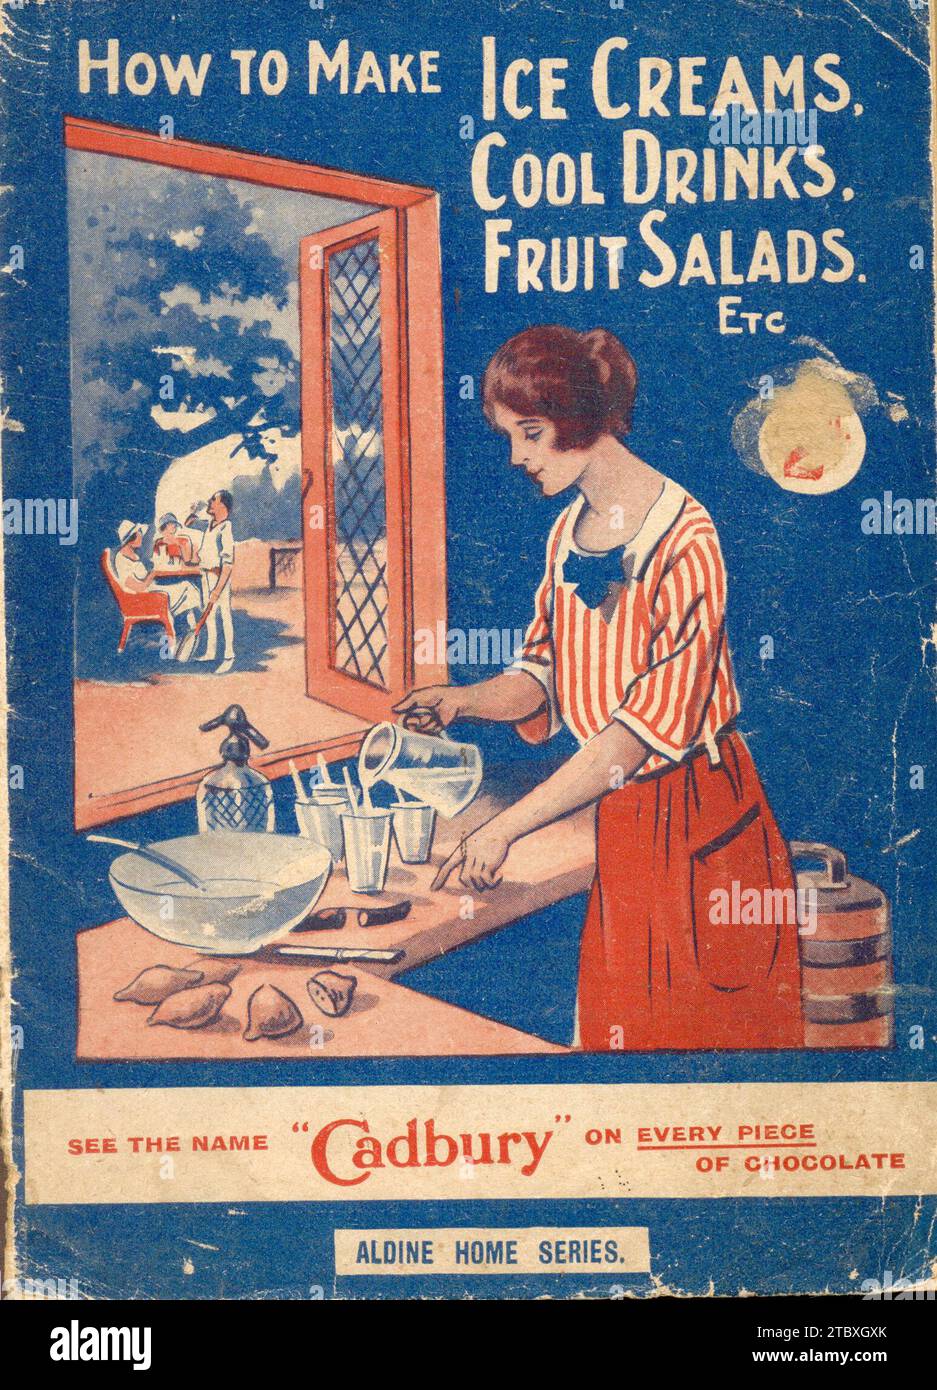 Recipe booklet How to Make Ice Creams, Cool Drinks, Fruit Salads, etc in the Aldine Home Series 1932 Stock Photo